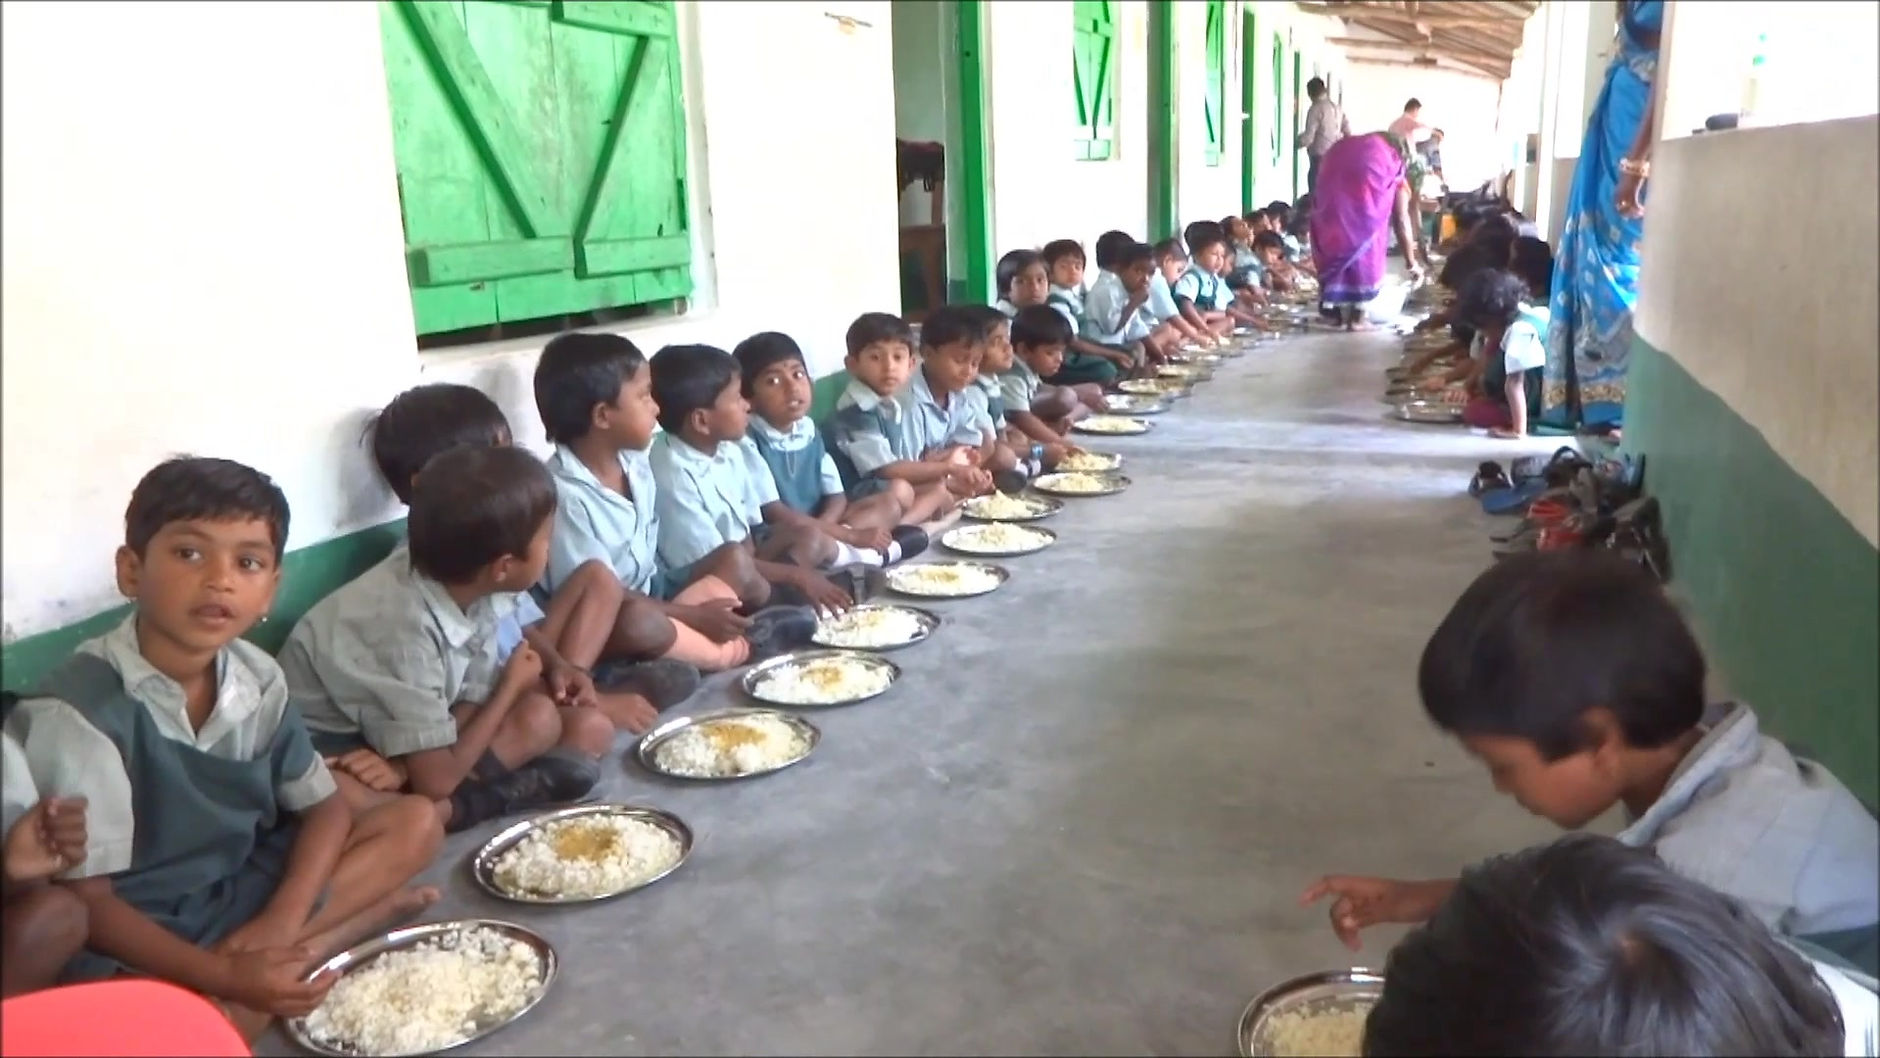 THE INDIA SCHOOL PROJECT VIDEOS